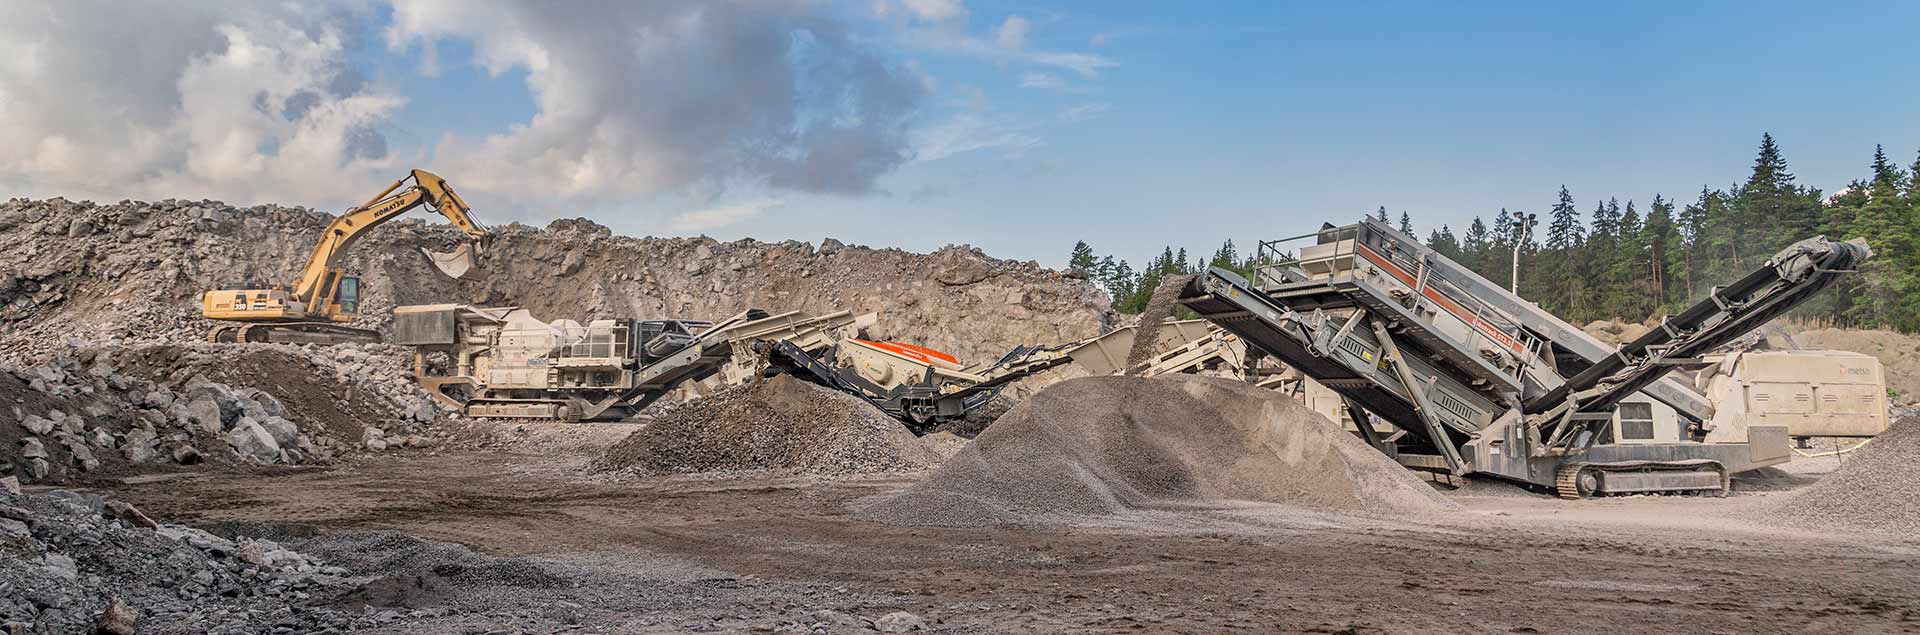 Process optimization and controls for aggregates equipment.